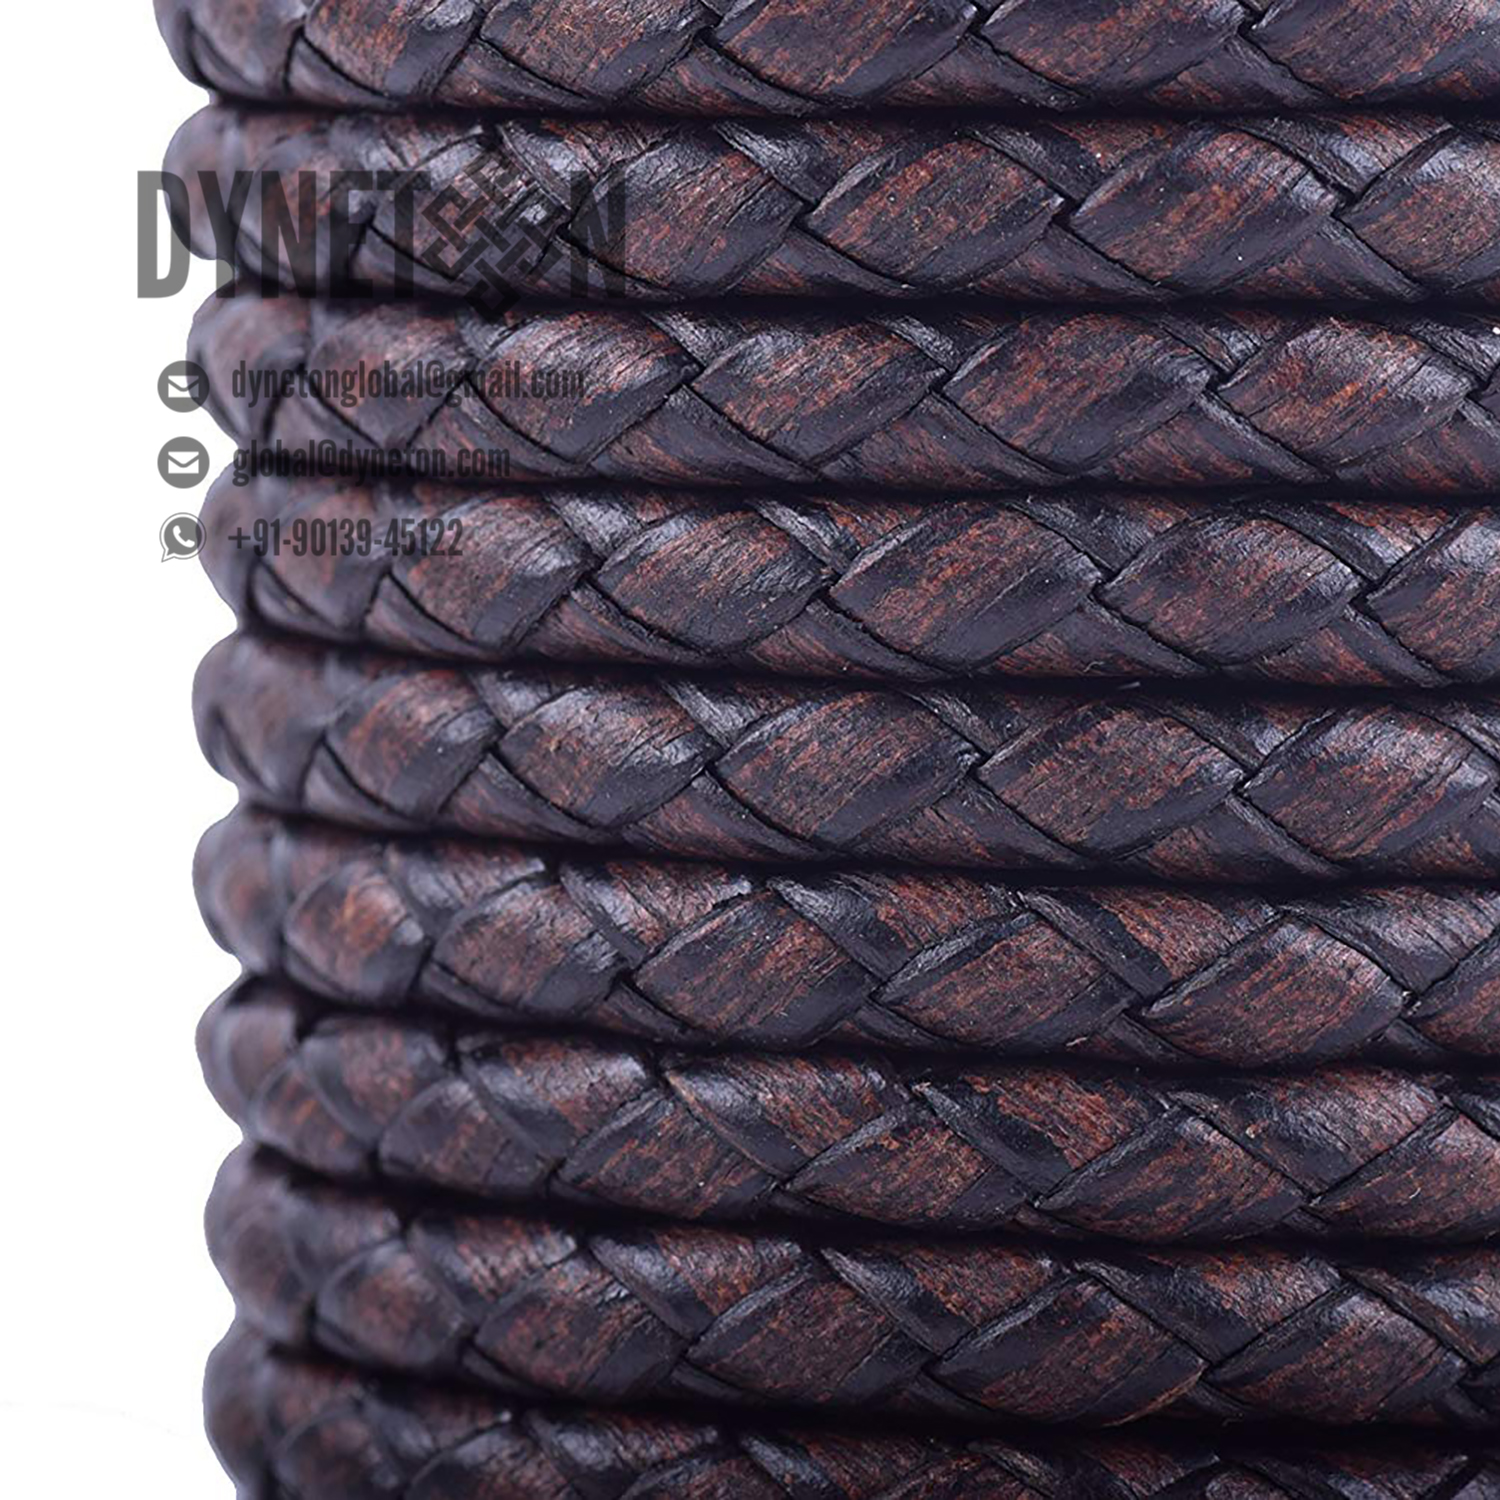 10mm Bolo Braided Leather Cord - DYNETON / Braided Leather Cords 10 mm